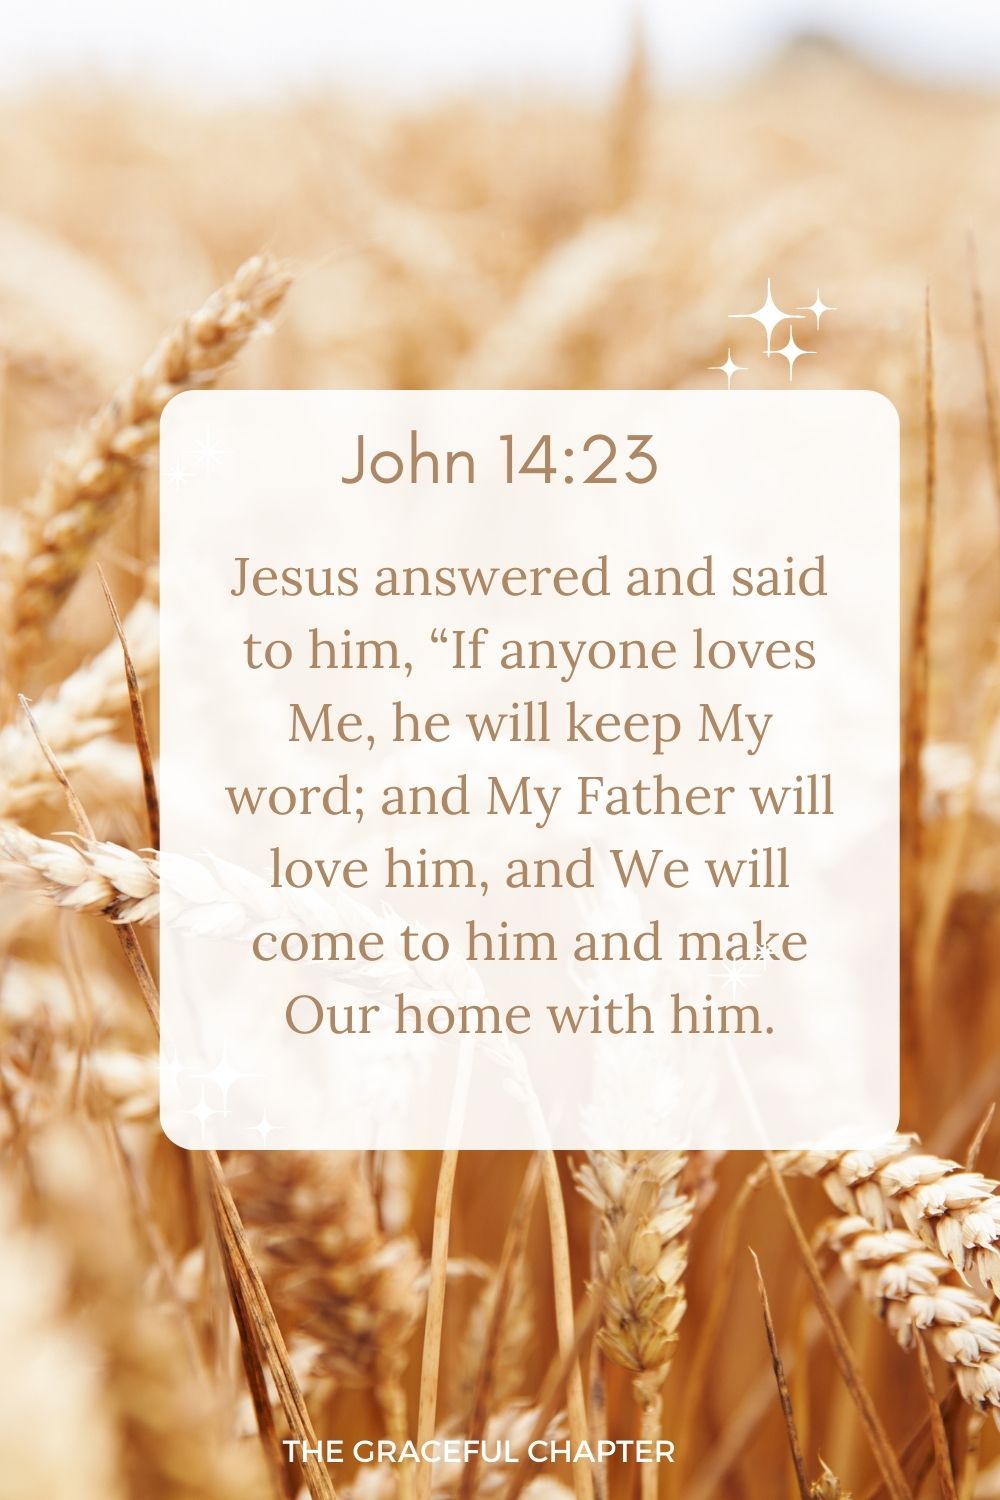 Jesus answered and said to him, “If anyone loves Me, he will keep My word; and My Father will love him, and We will come to him and make Our home with him. John 14:23